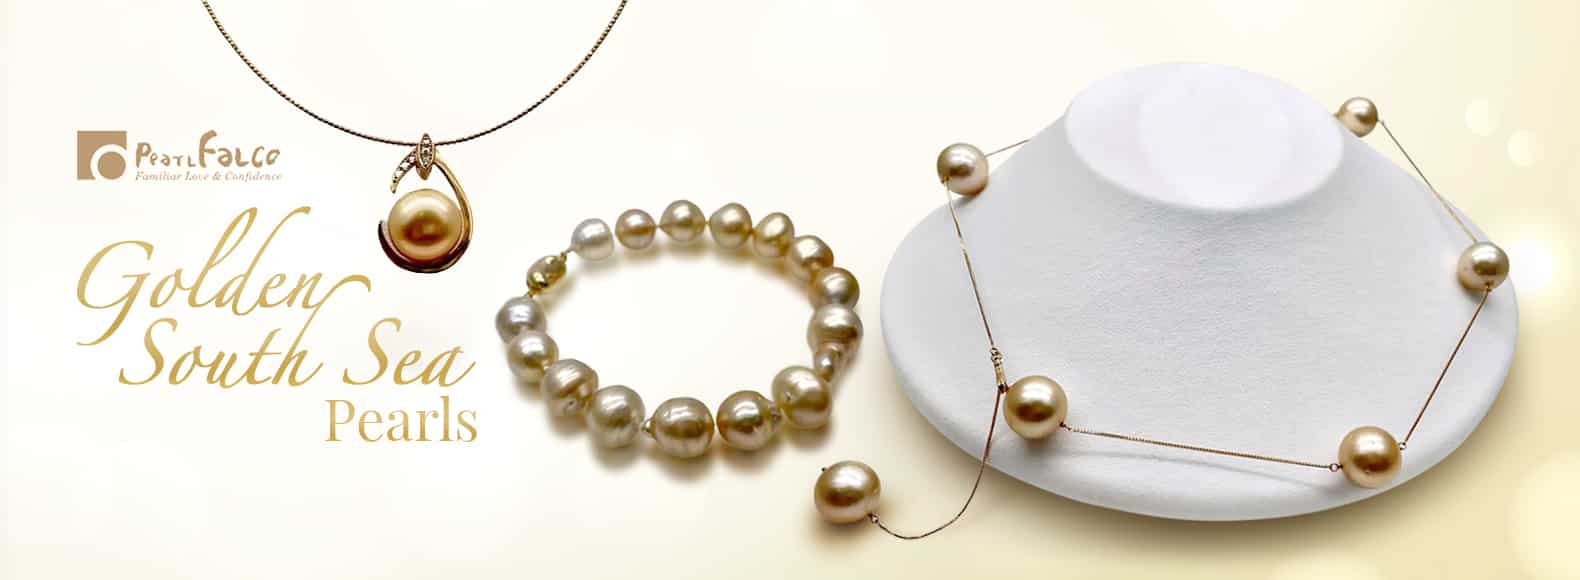 Pearl FALCO’s Summer Sensations Collection. Gold South Sea Pearls Never Looked So Good!